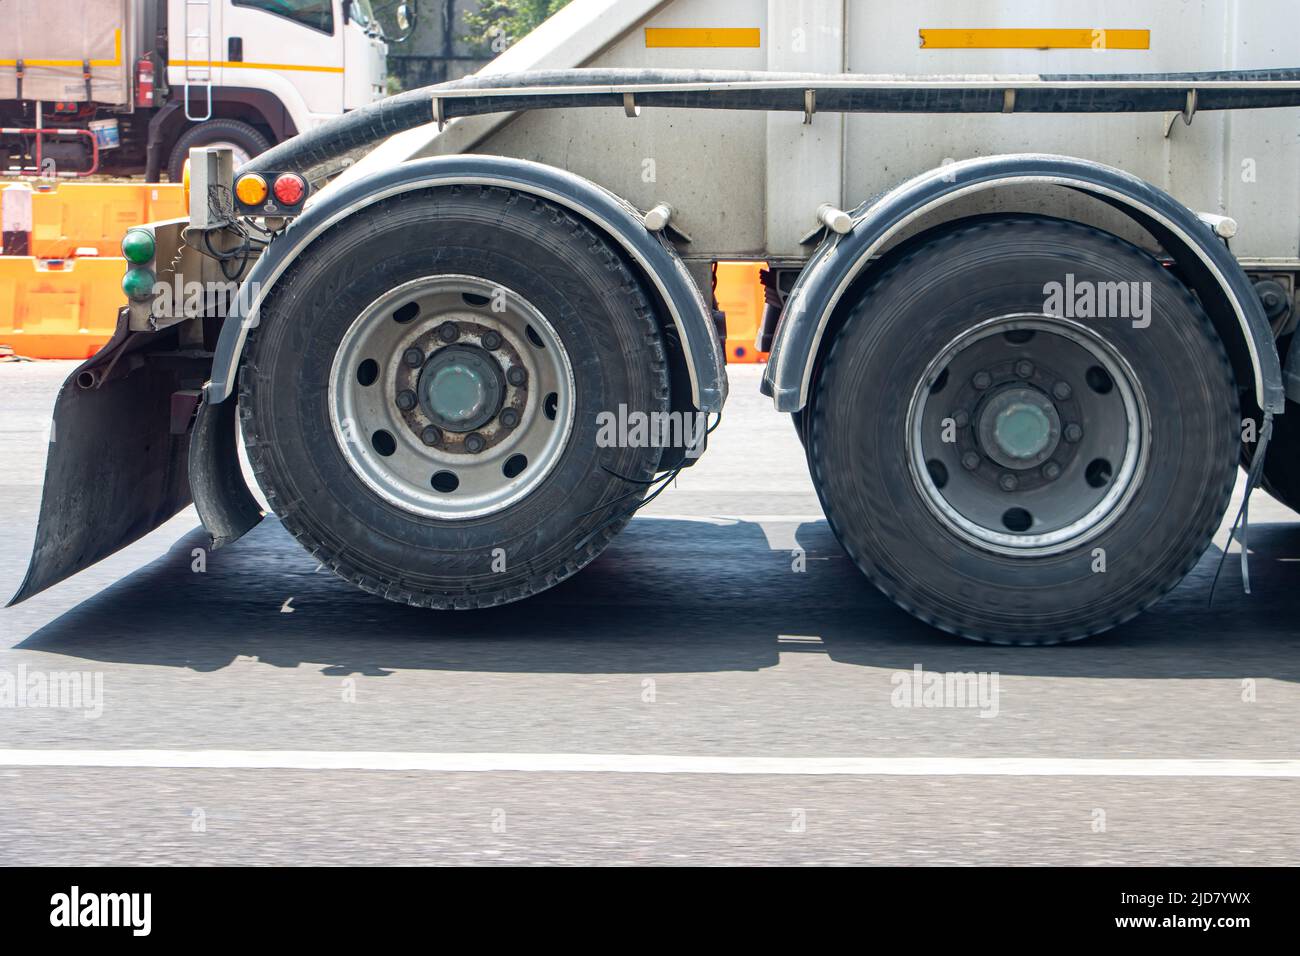 View of the rear wheels of a truck while driving with the rear axle raised Stock Photo